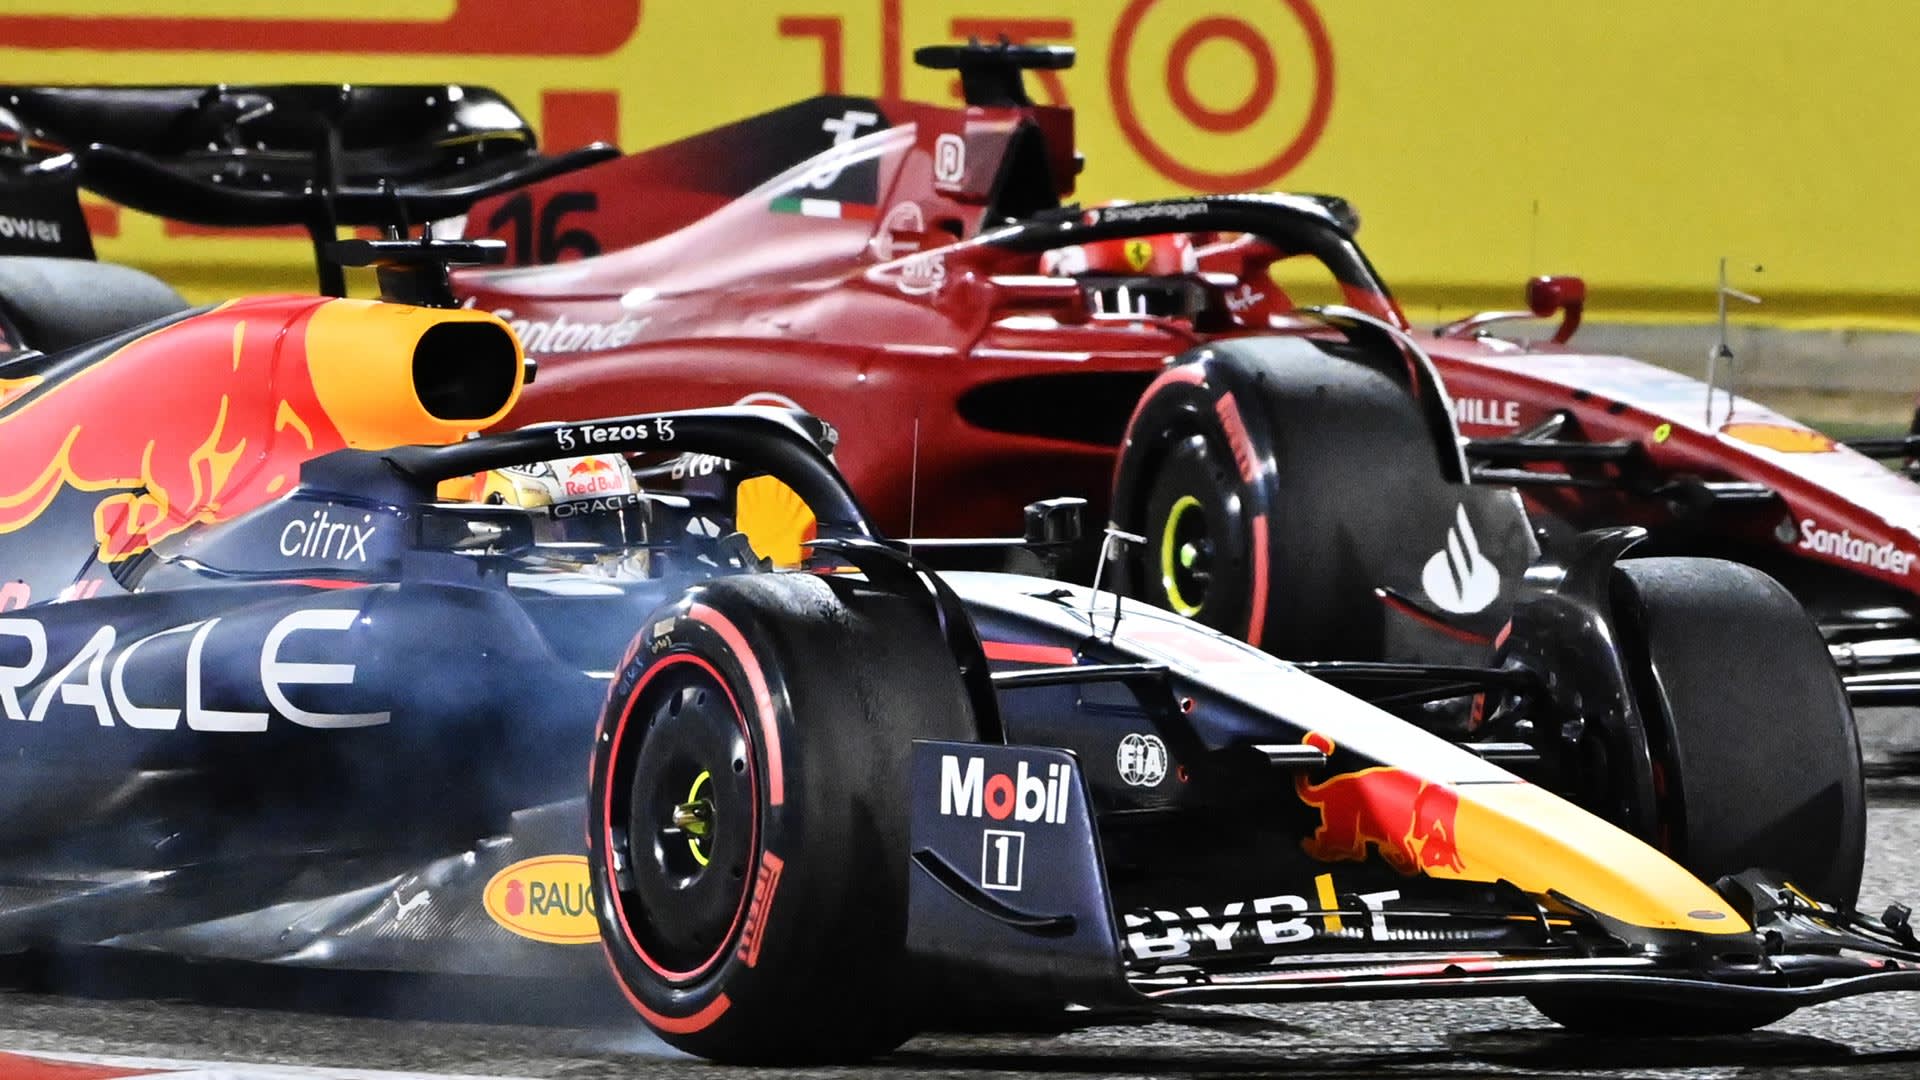 More Ferrari success or a Red Bull resurgence? 5 storylines we’re